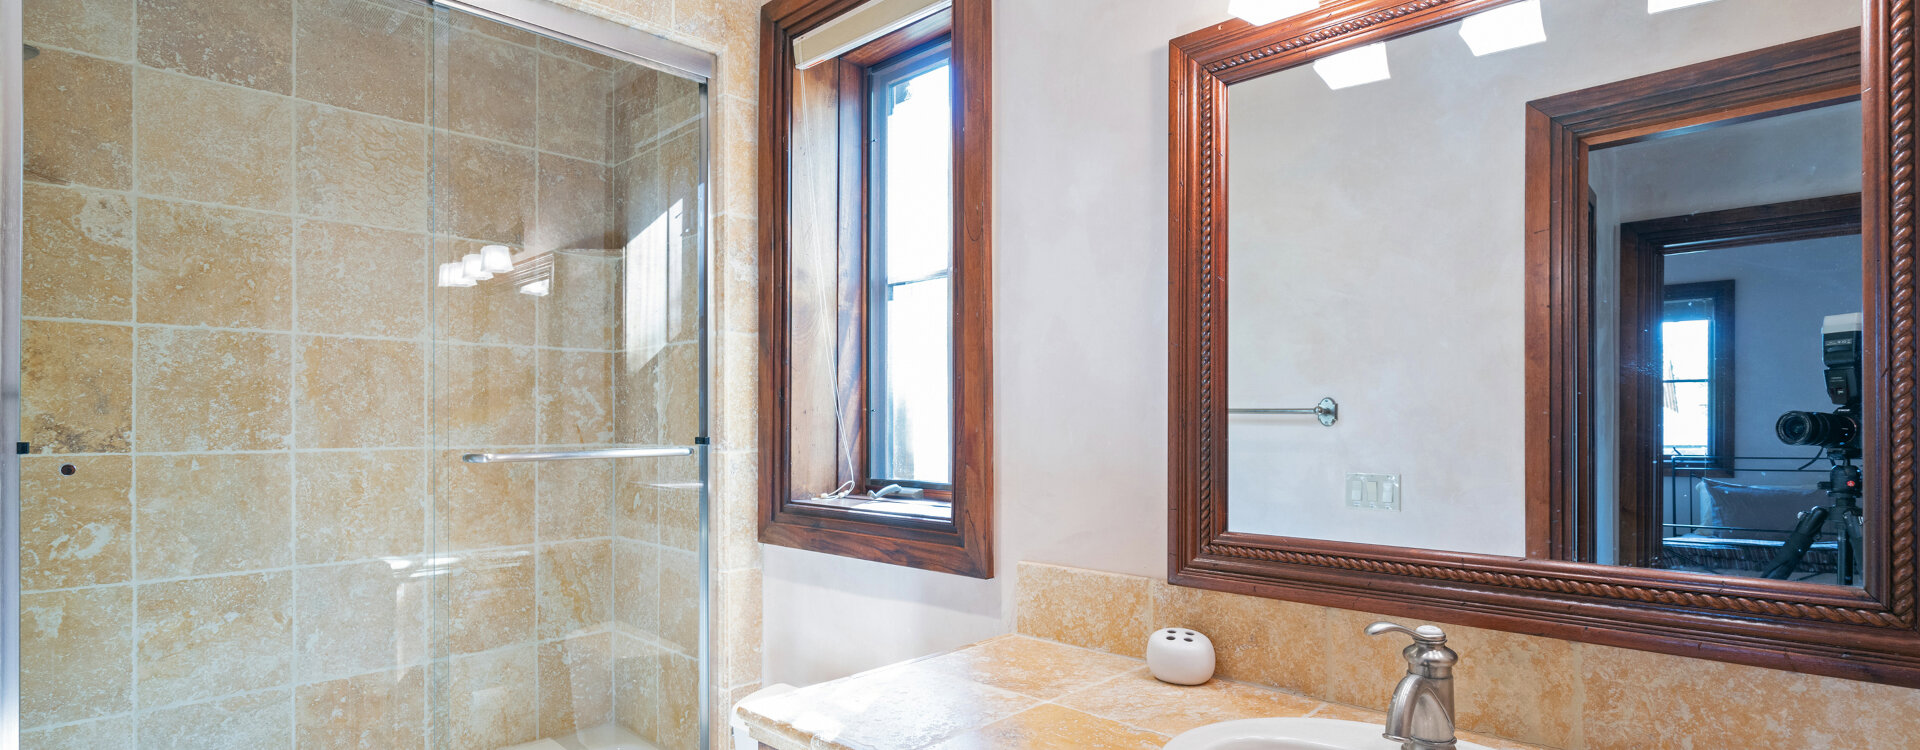 8.02-telluride-picture-perfect-twin-guest-bathroom